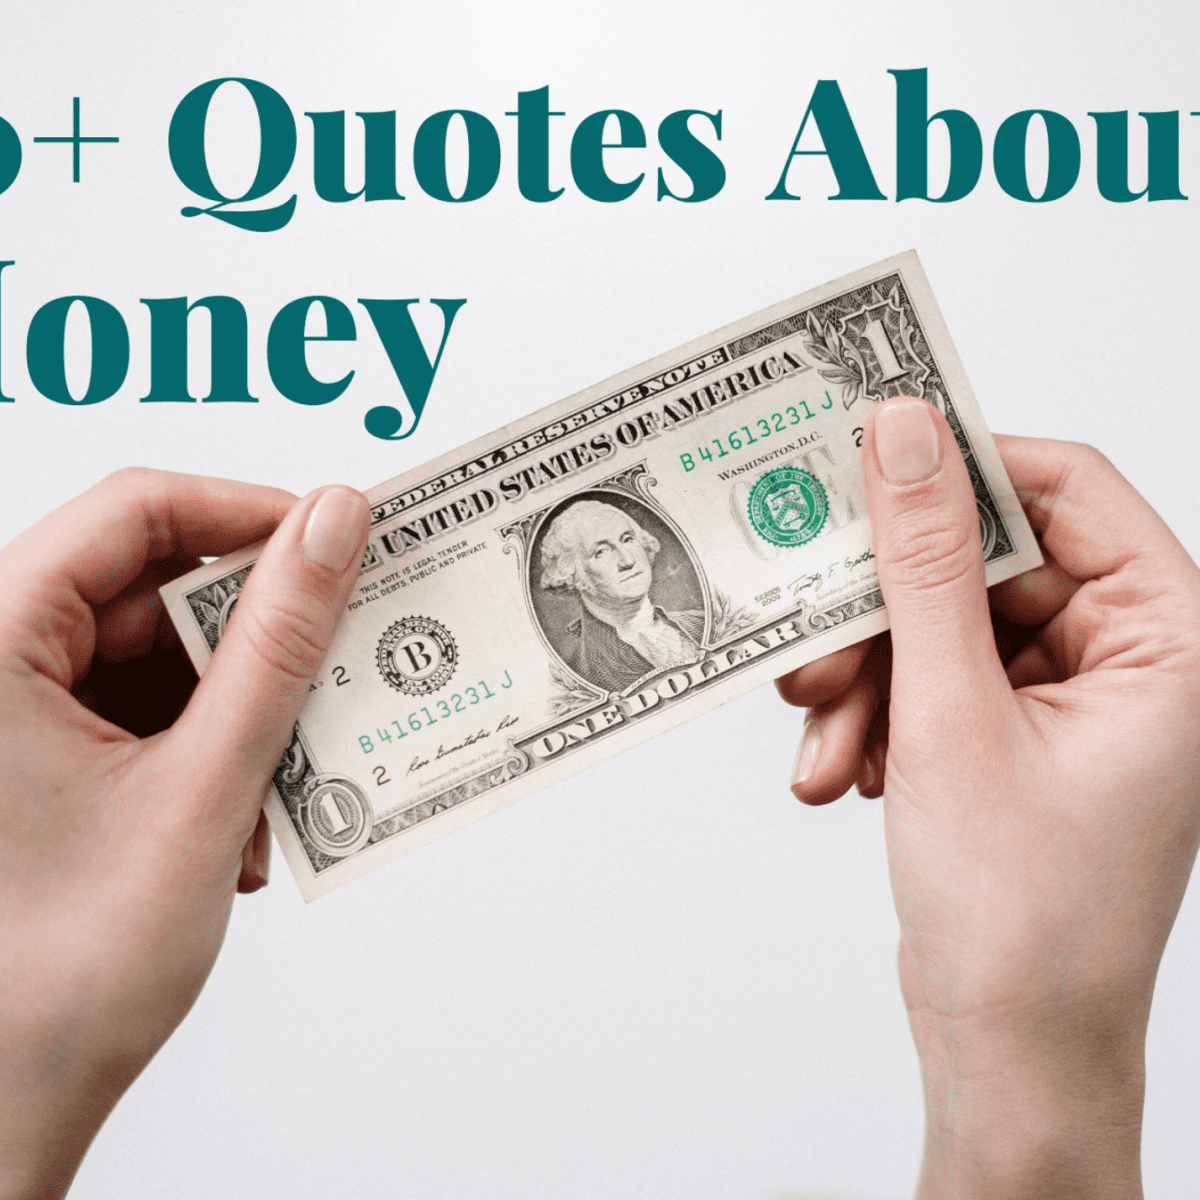 make money quotes and sayings